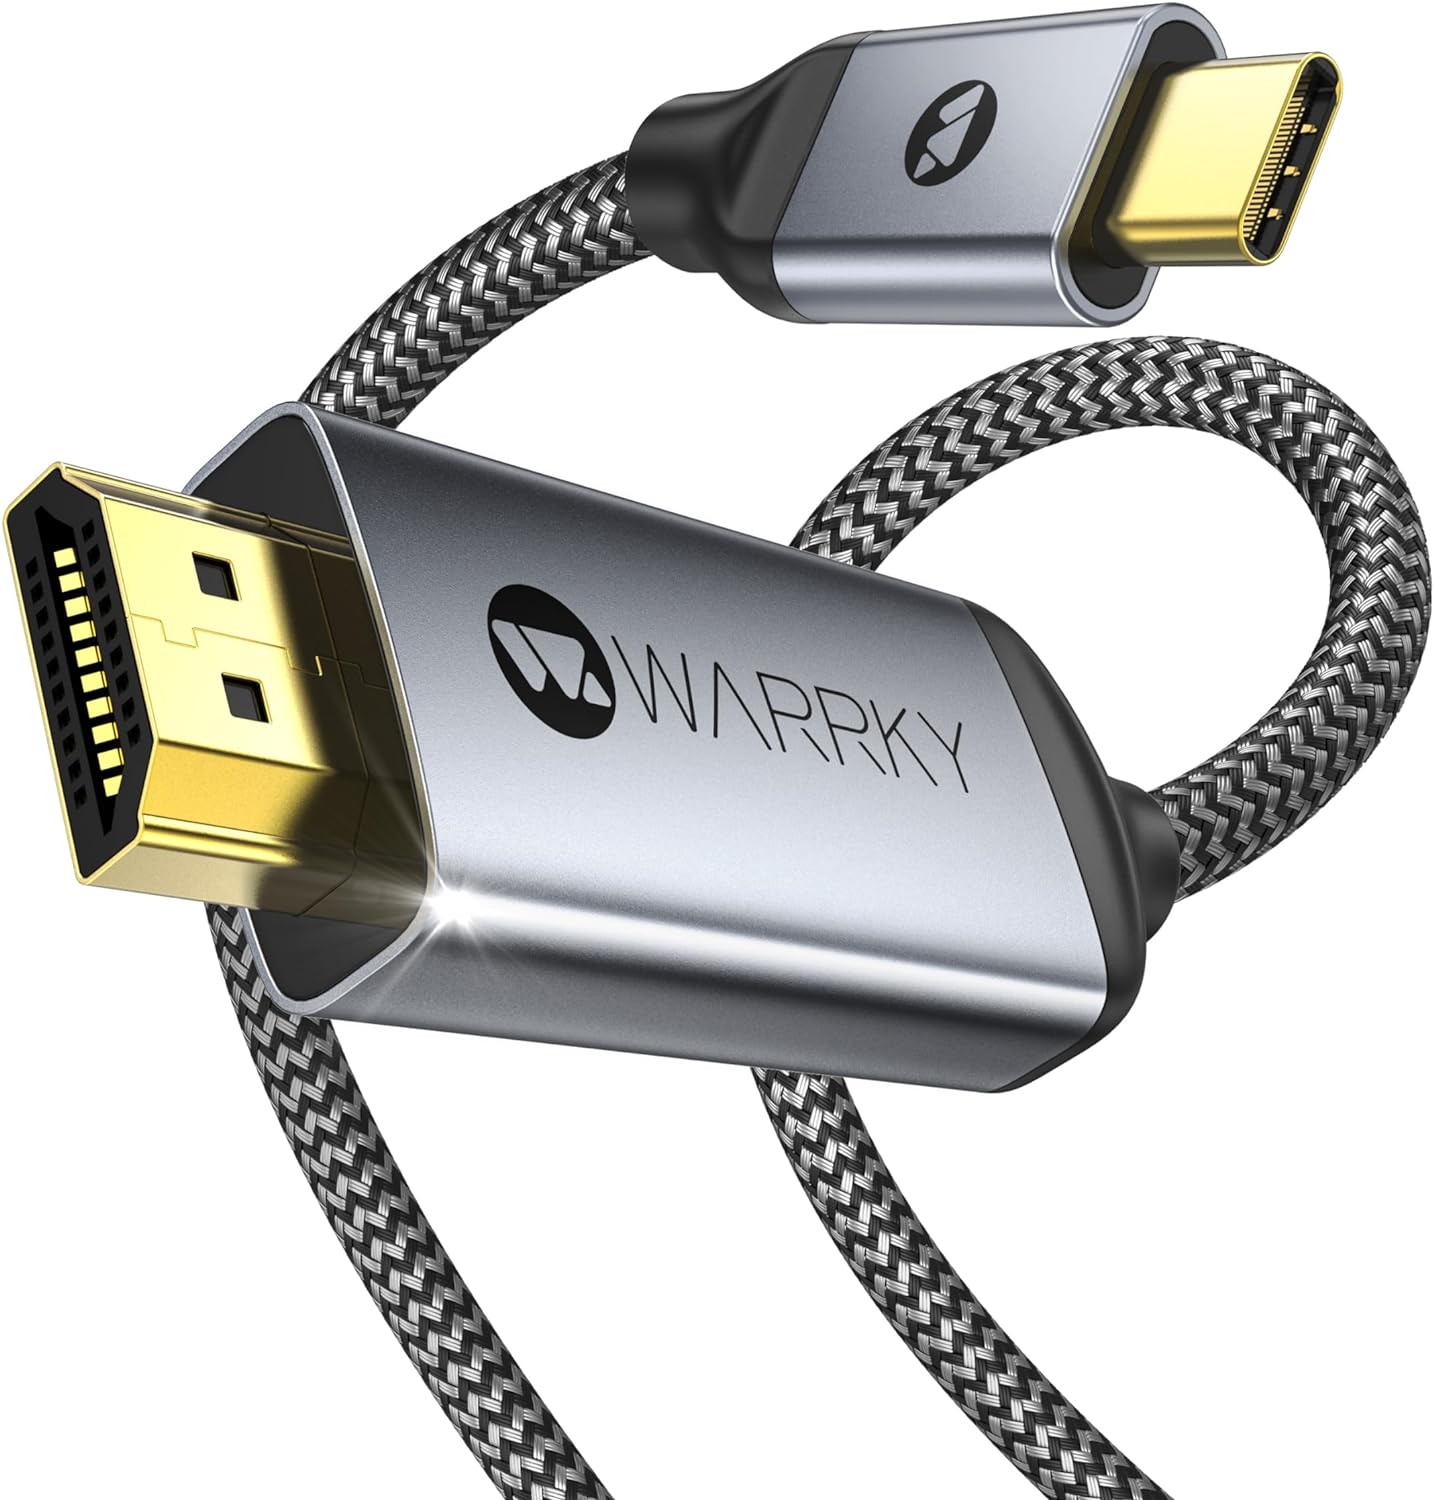 Cable Warrky USB C to HDMI Cable 4K